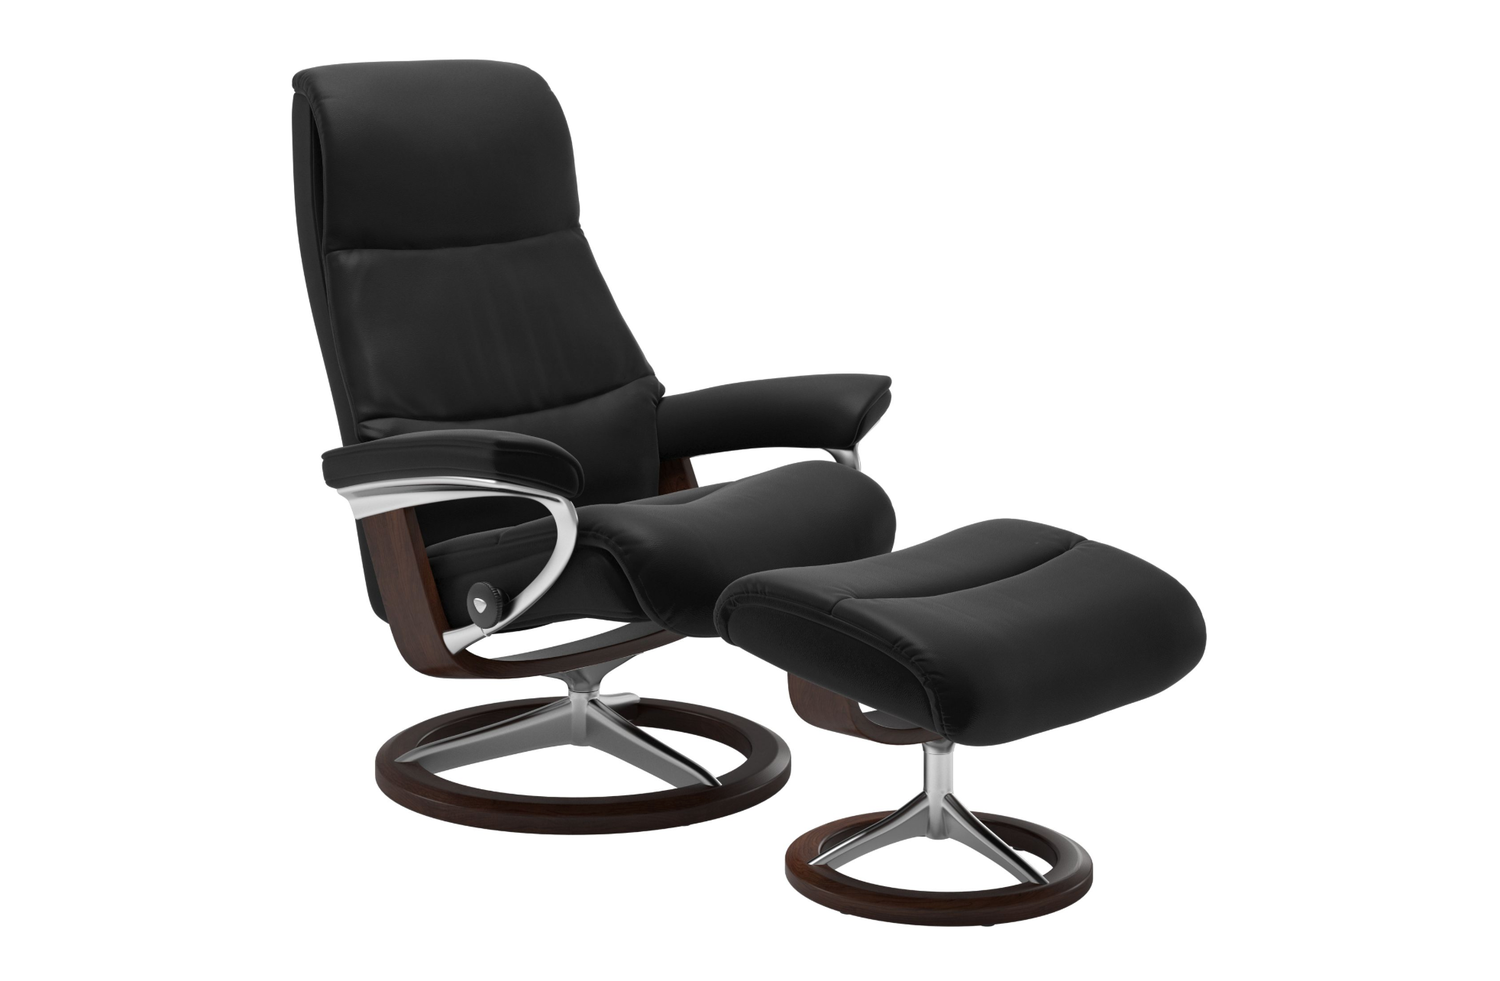 Stressless View Recliners – SL